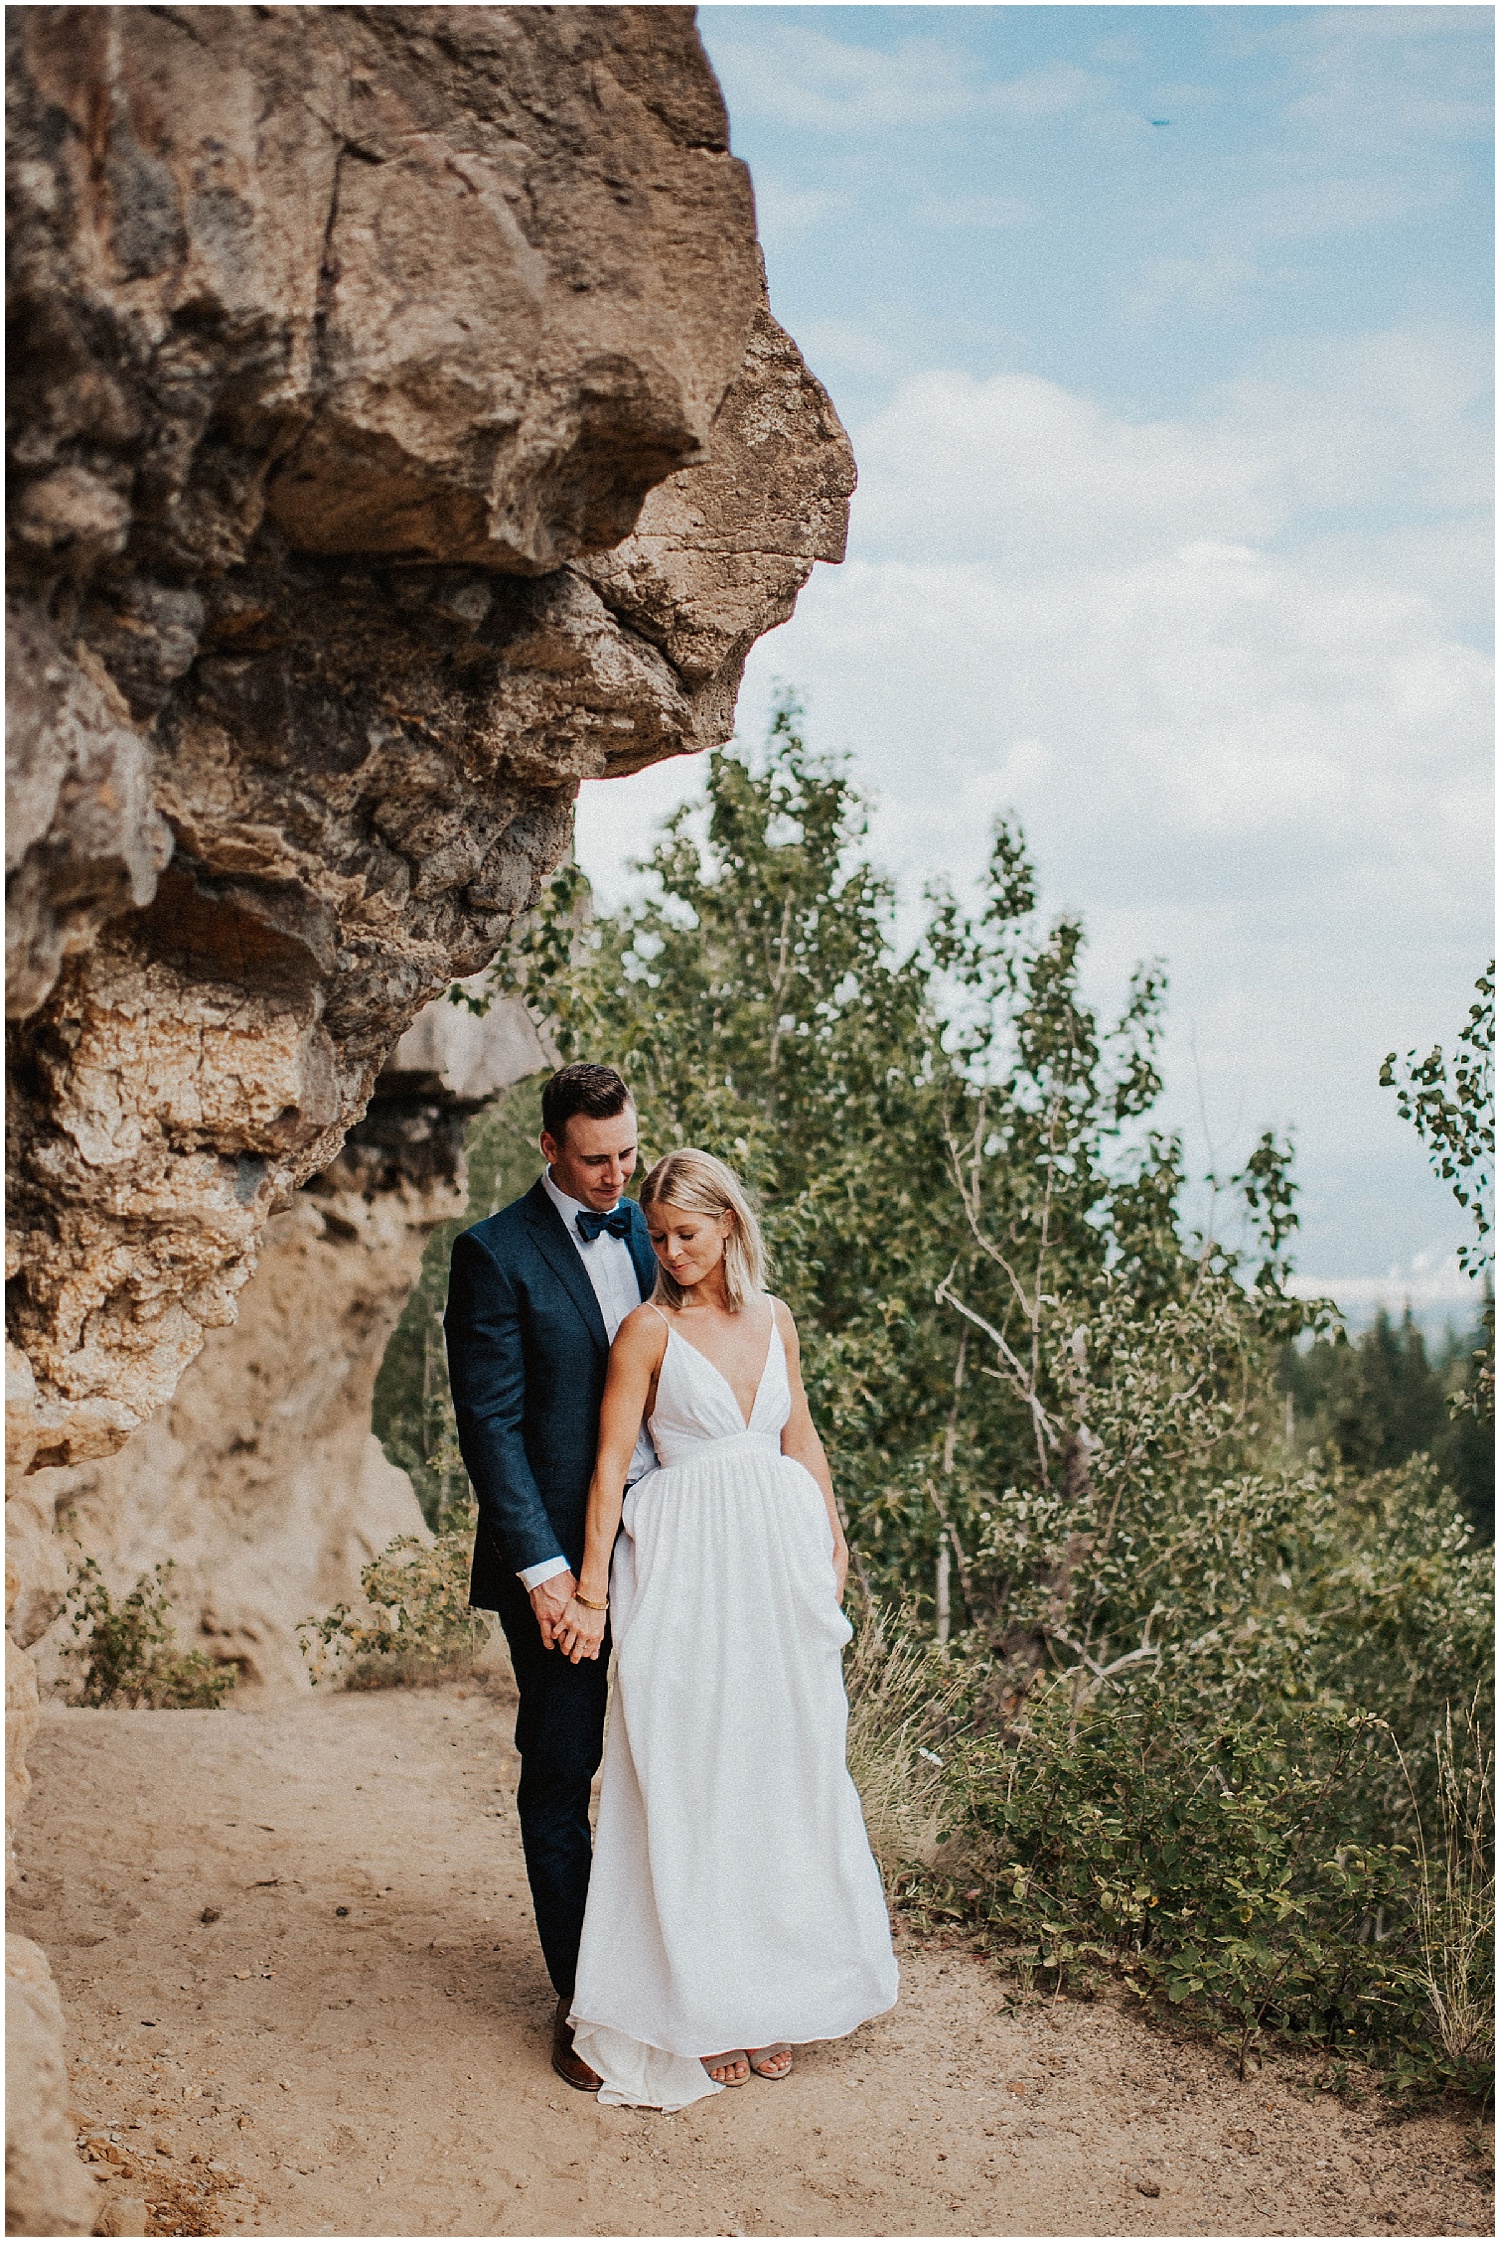  bc wedding photographer quesnel couple popping champagne fun photography pinnacles park lookout point elopement norther bc 